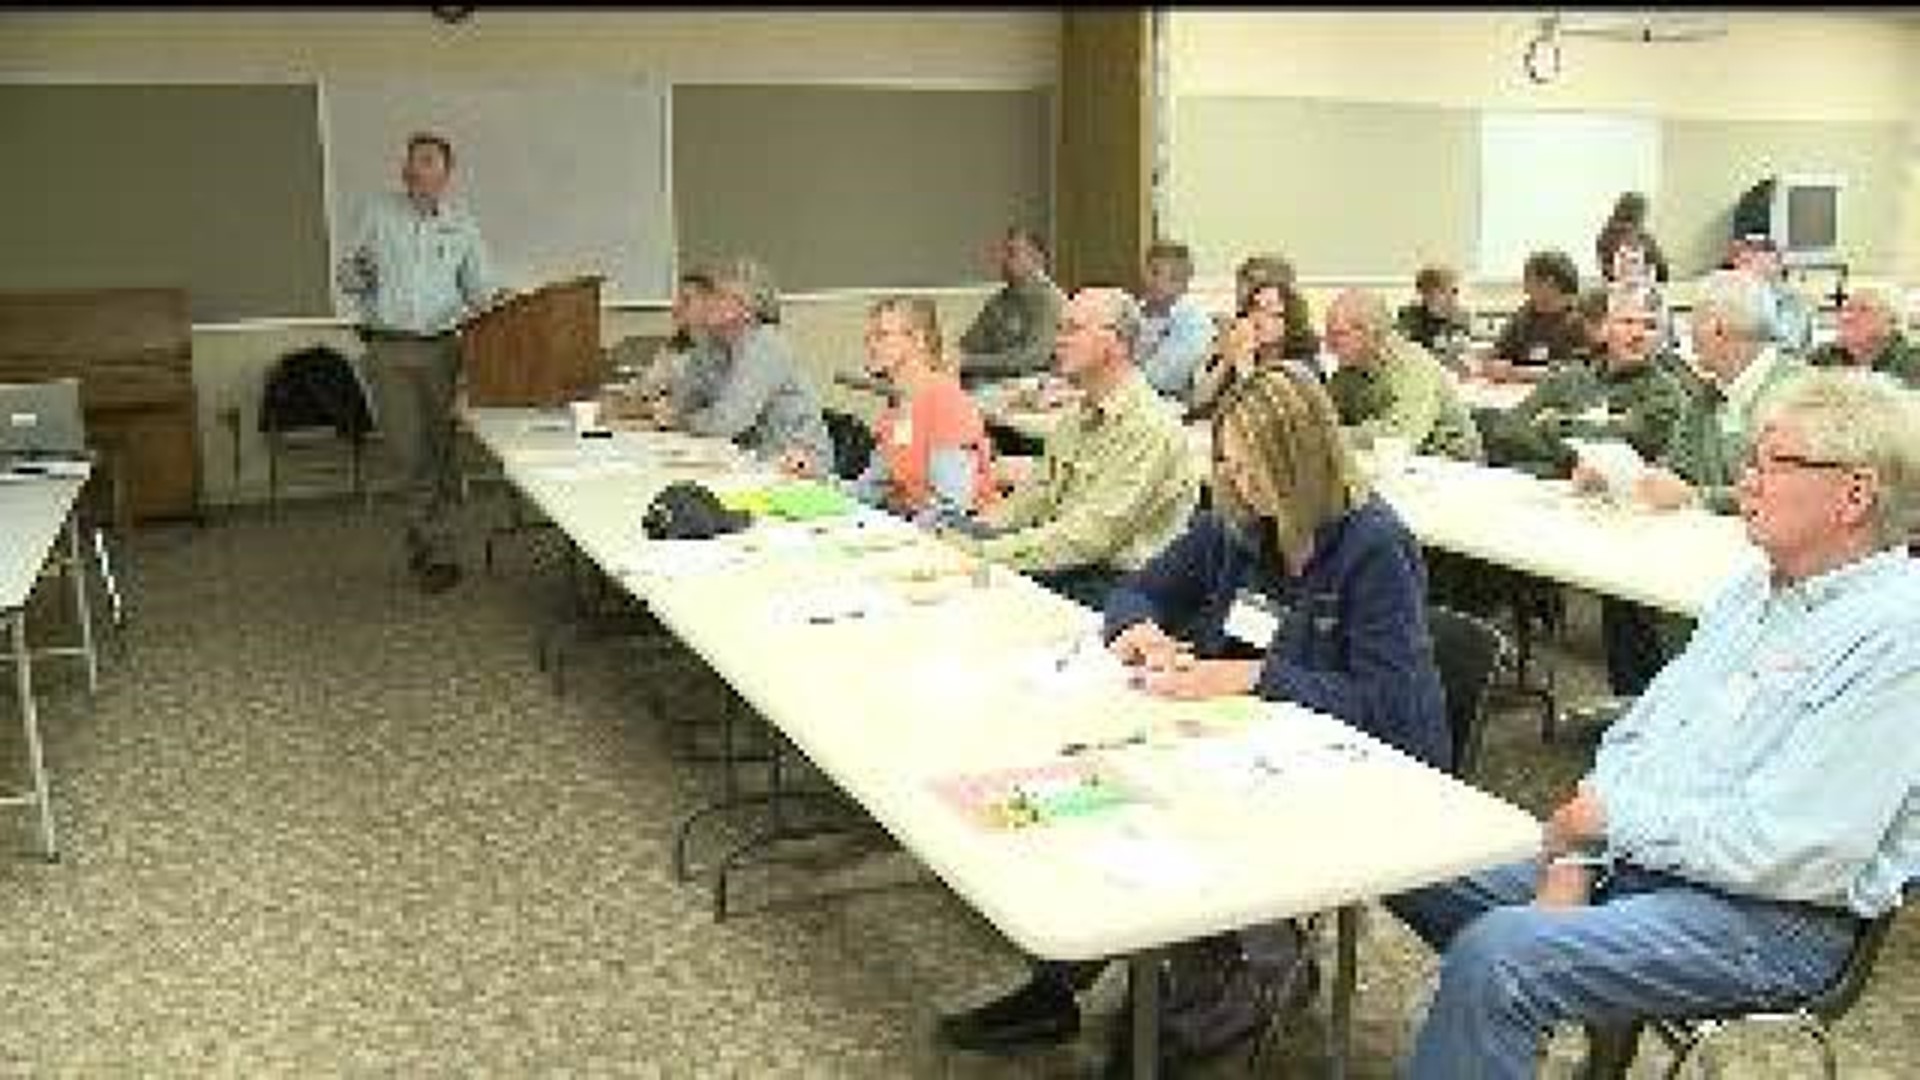 Farmers meet buyers at Galesburg session